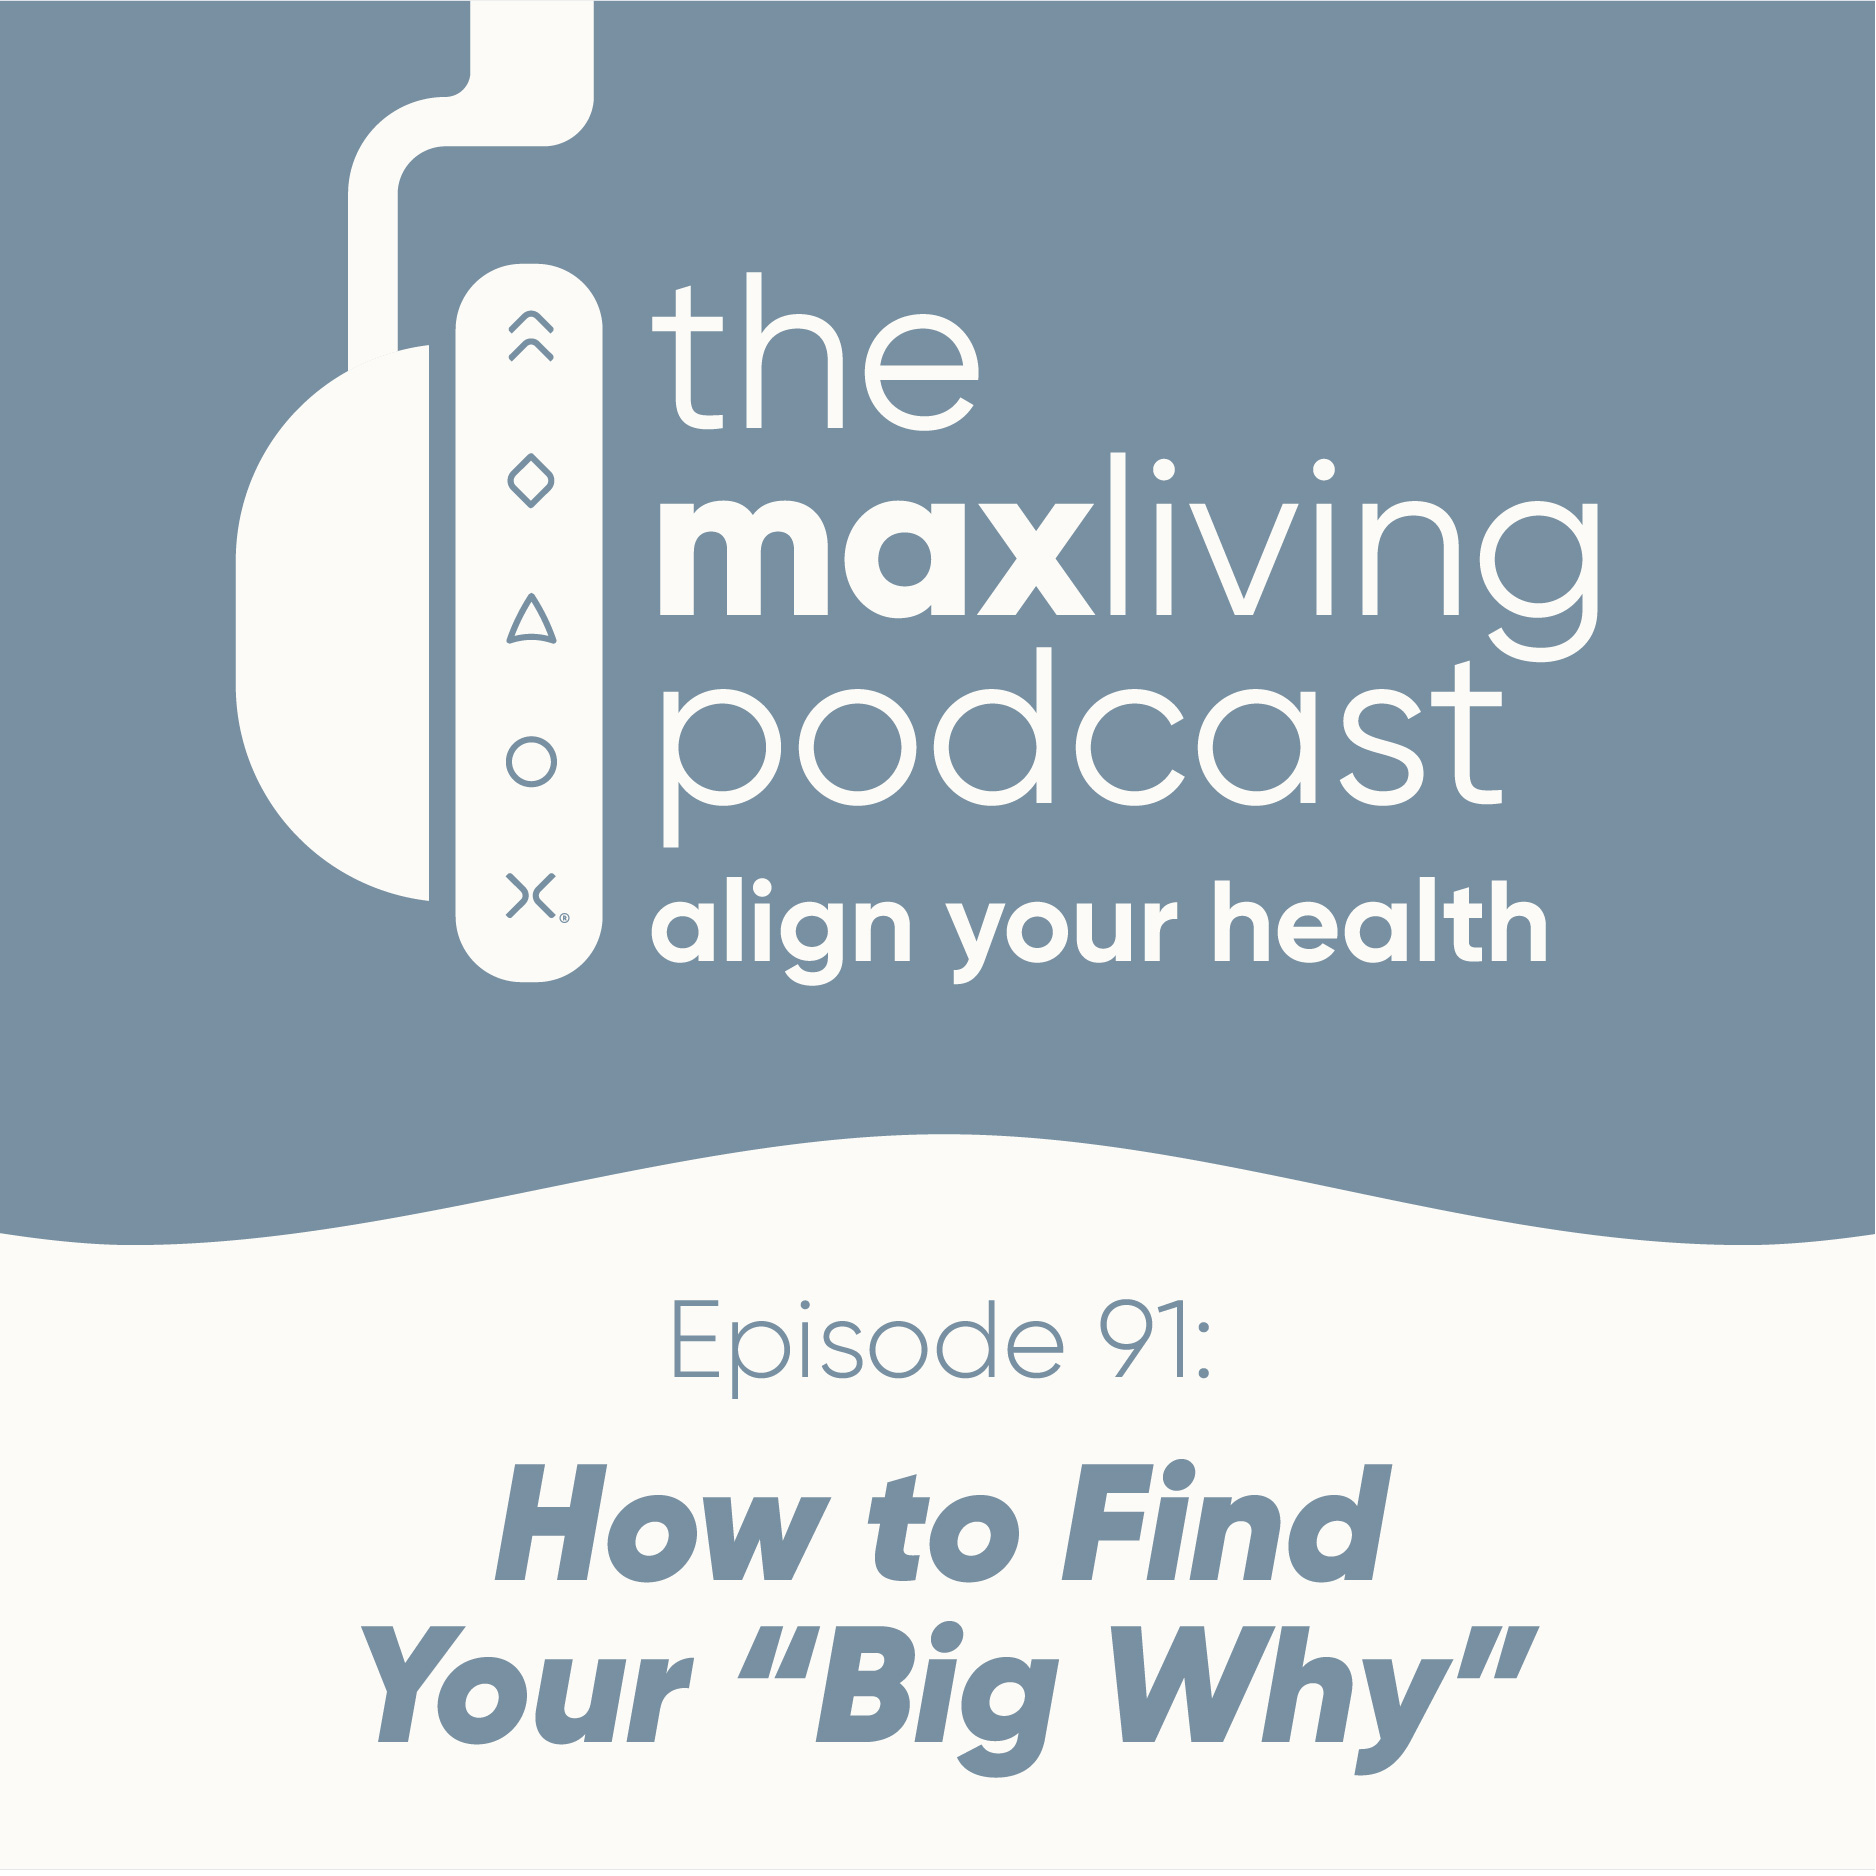 How to Find Your “Big Why”